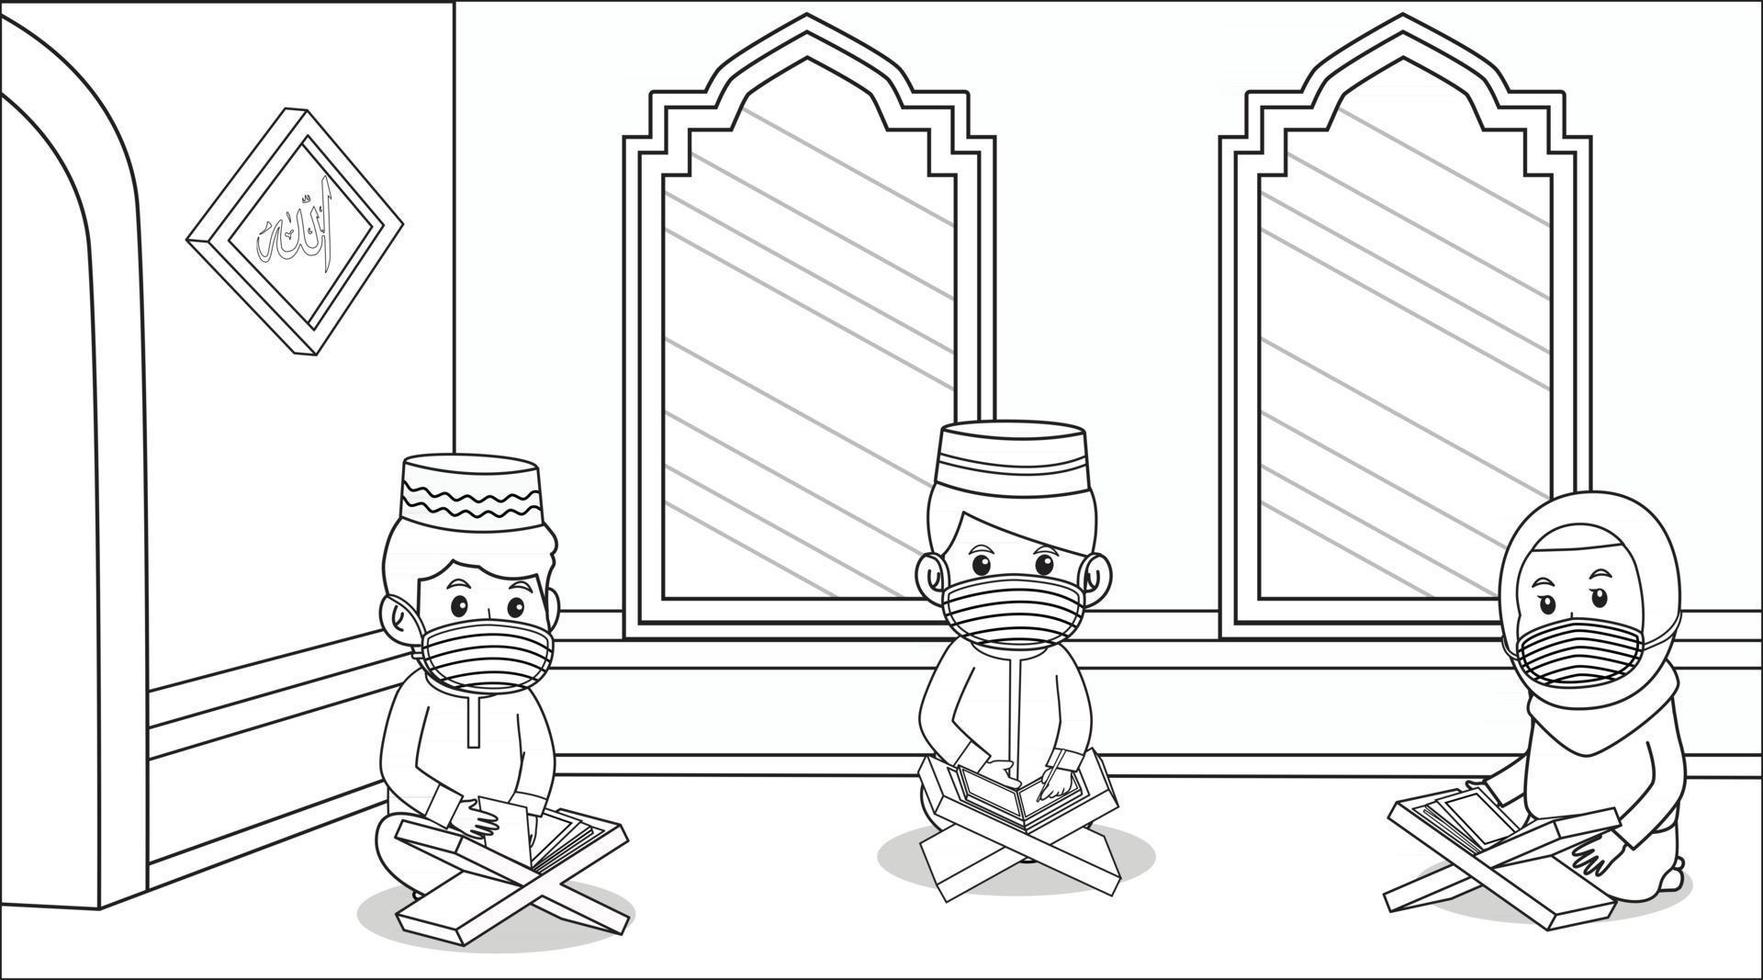 During the corona virus pandemic,muslim inside mosque ,in ramadan month.children reading holy book muslim al-quran,using masks and health protocols.children book illustration. vector